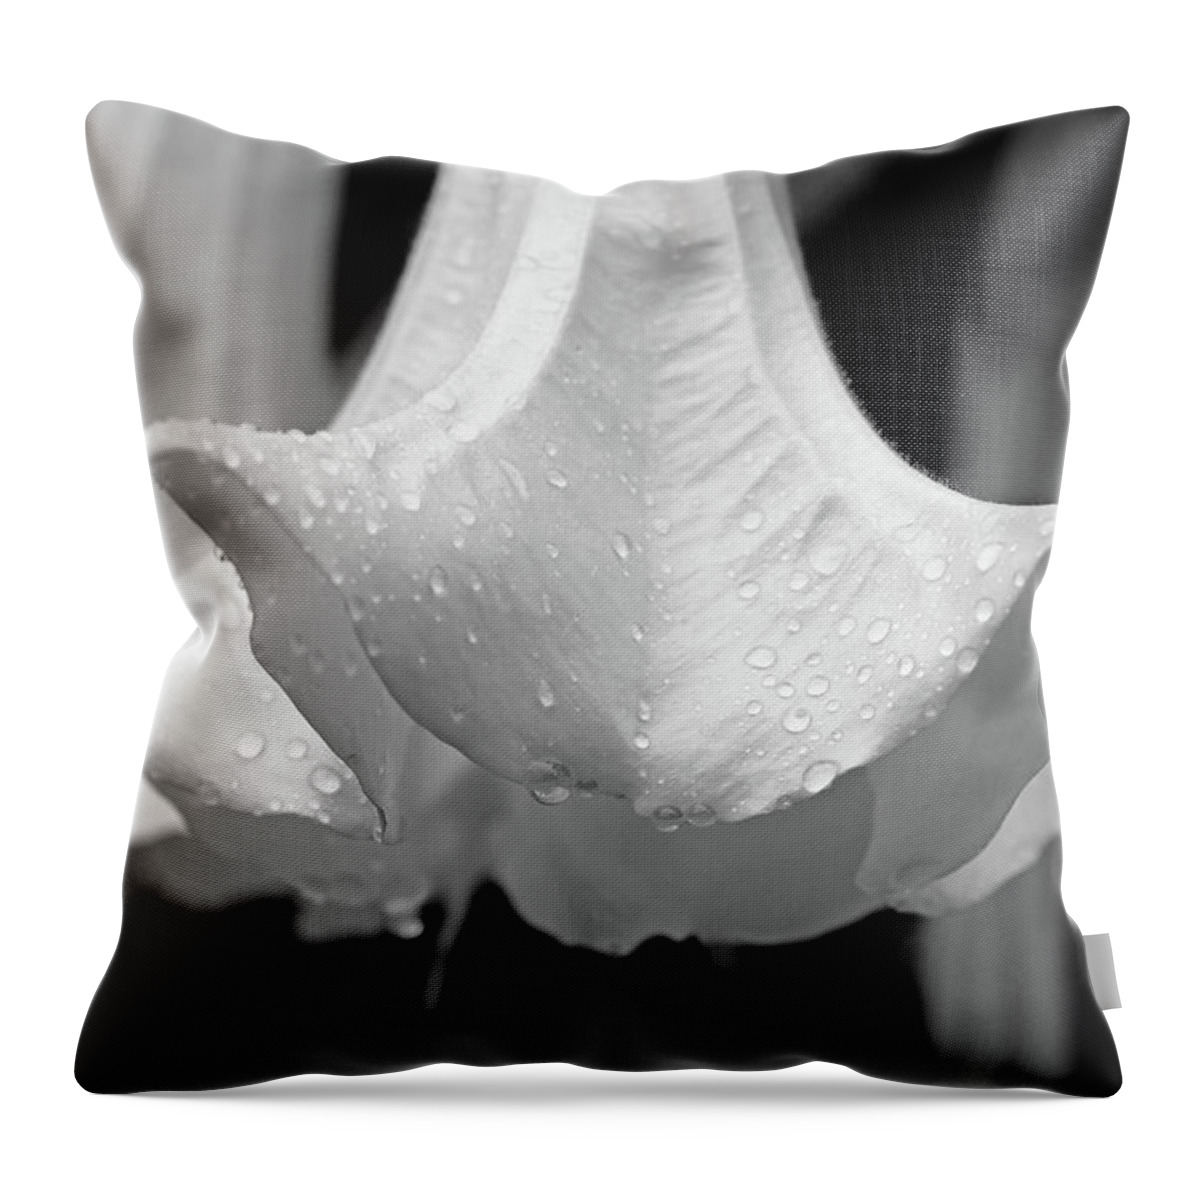 Angel's Trumpet Throw Pillow featuring the photograph Brugmansia Black And White by Debbie Oppermann